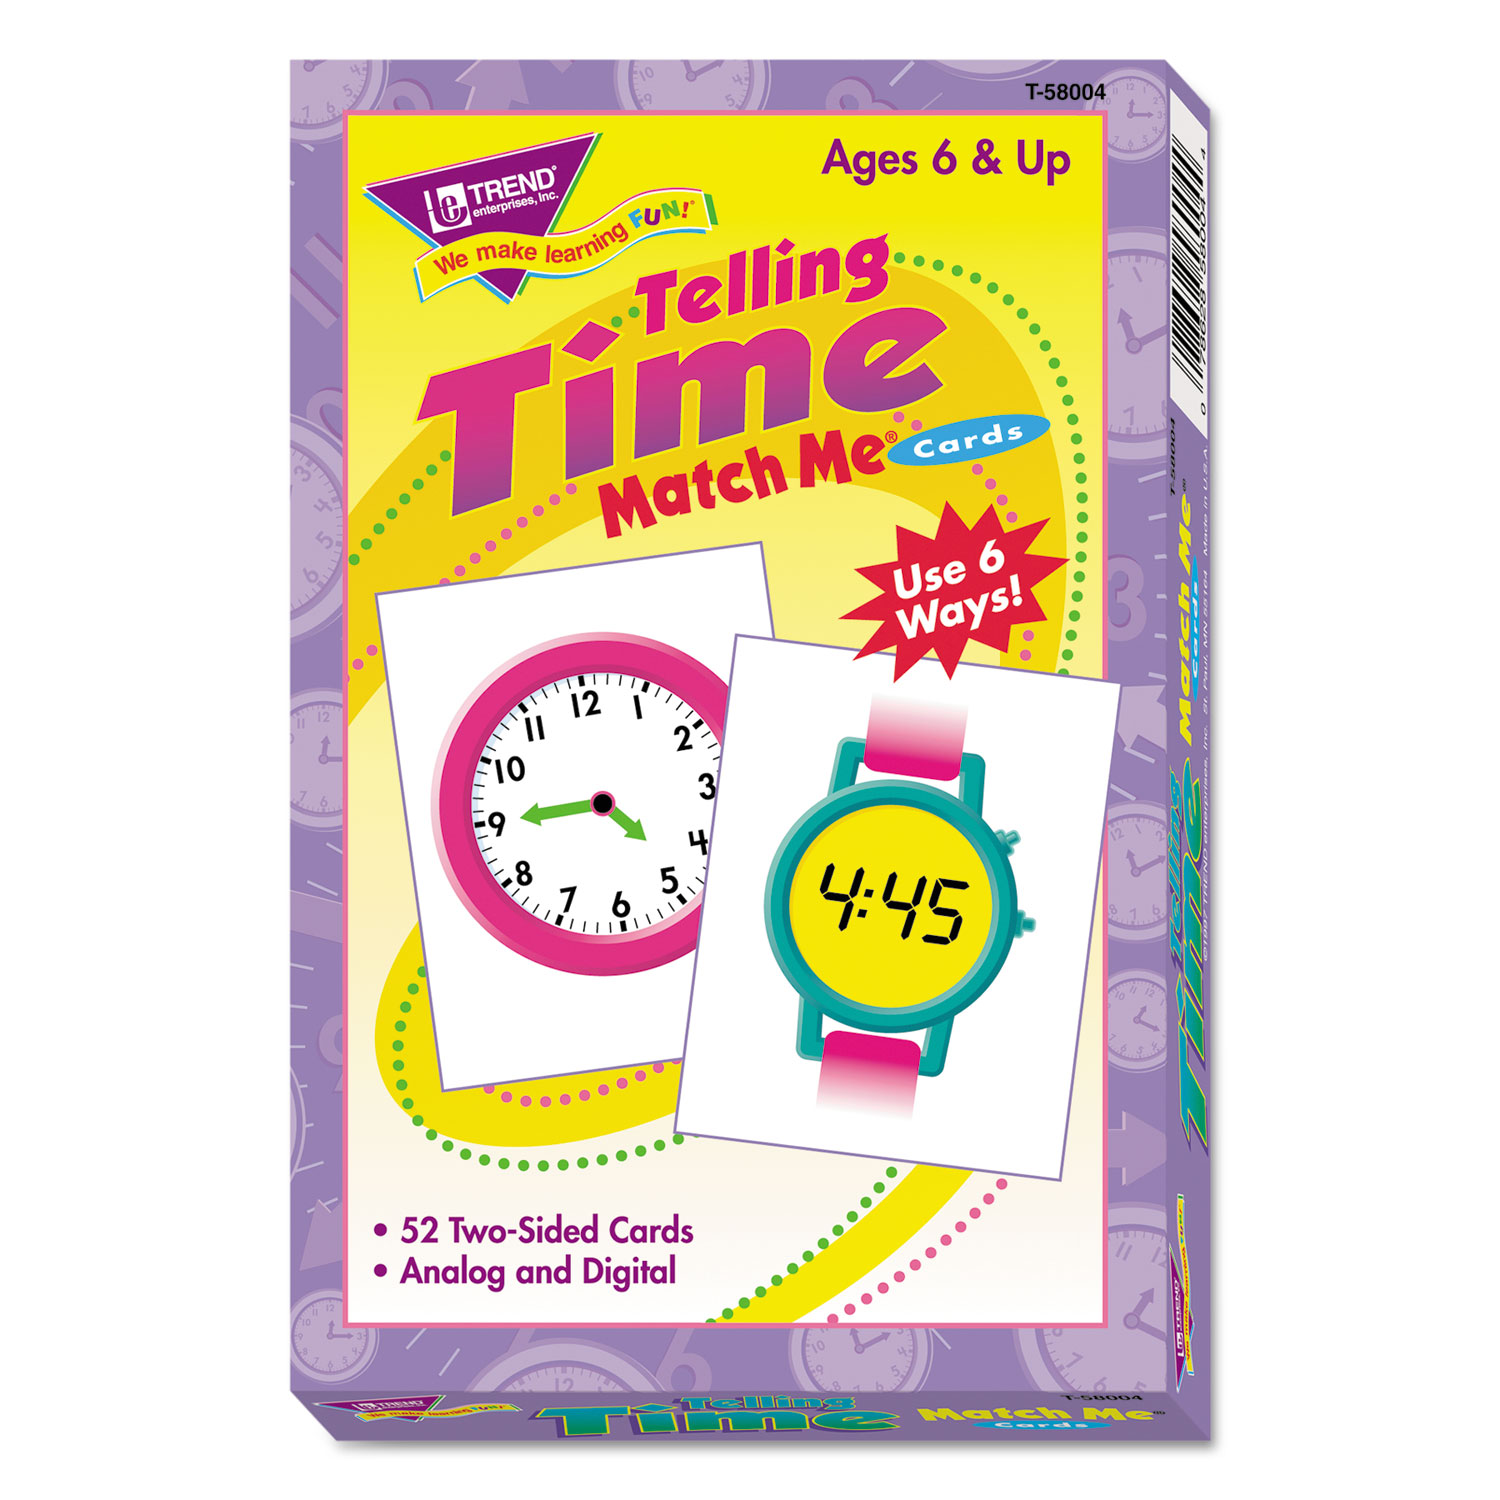 TREND® Match Me Cards, Telling Time, 52 Cards, Ages 6 and Up